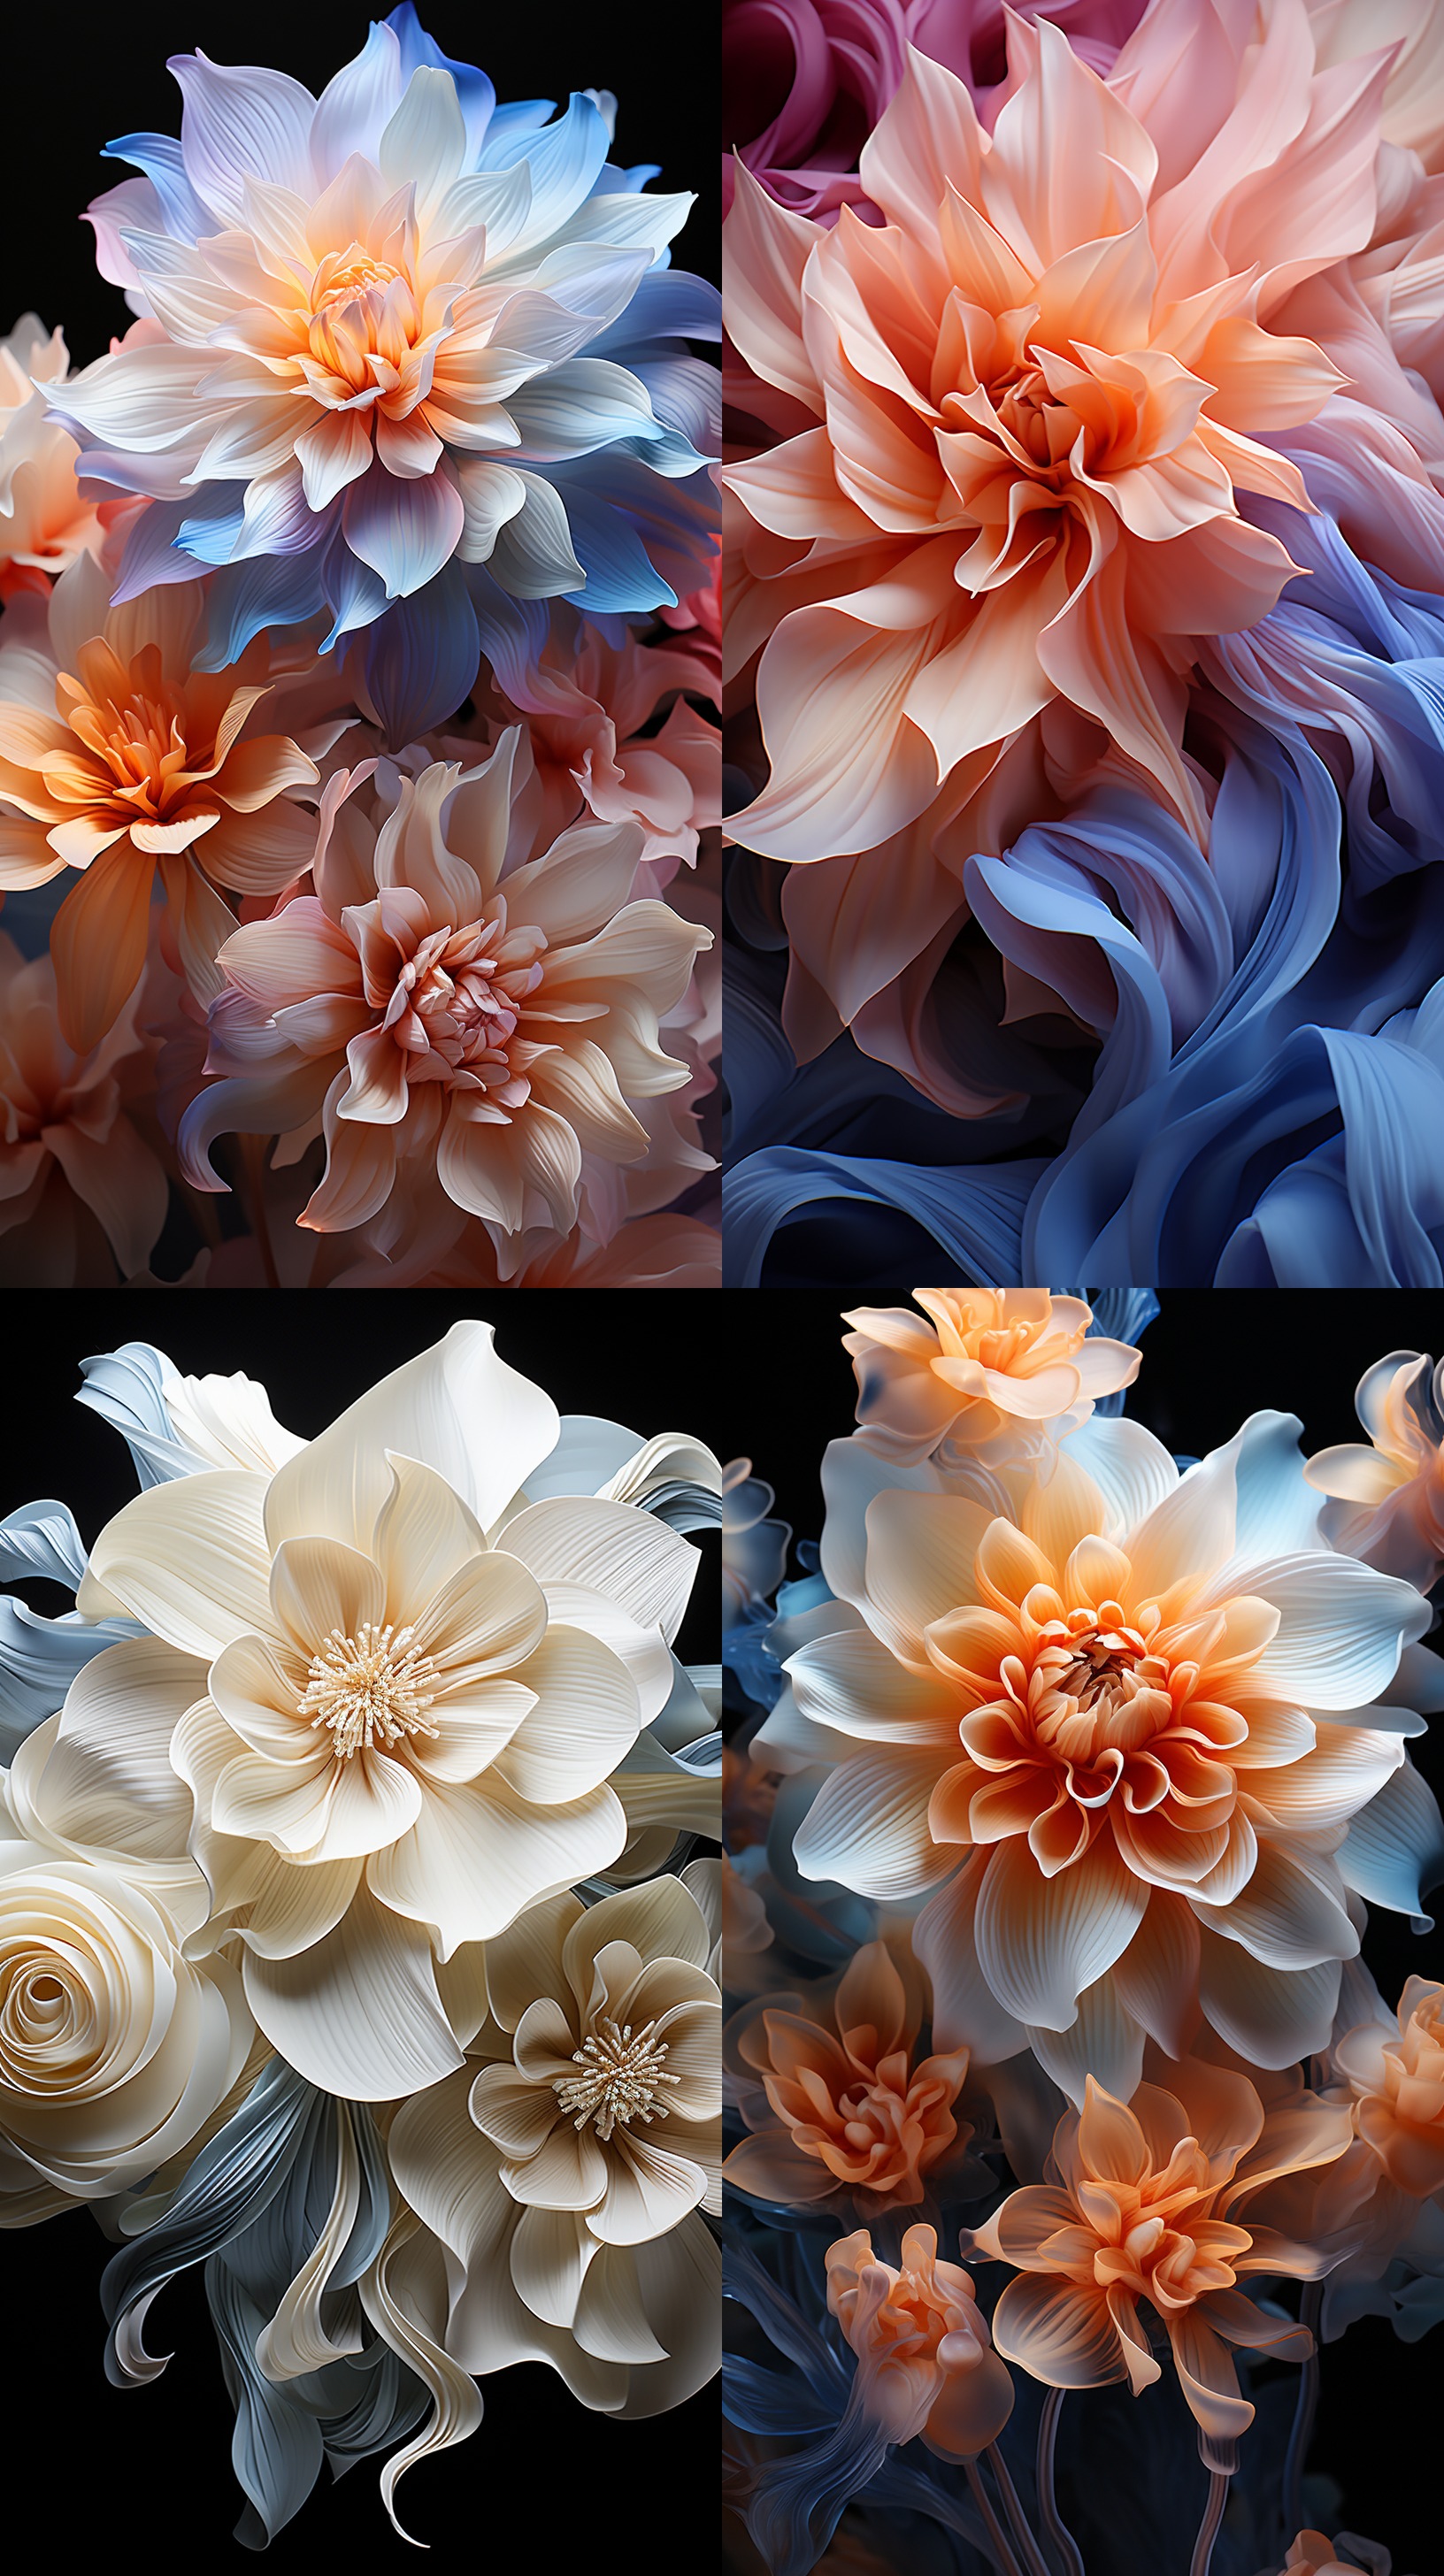 nicepsd_A_flower_all_petals_are_like_a_flower_folded_out_of_the_644030ae-f63d-4021-ba65-19f60b381e62